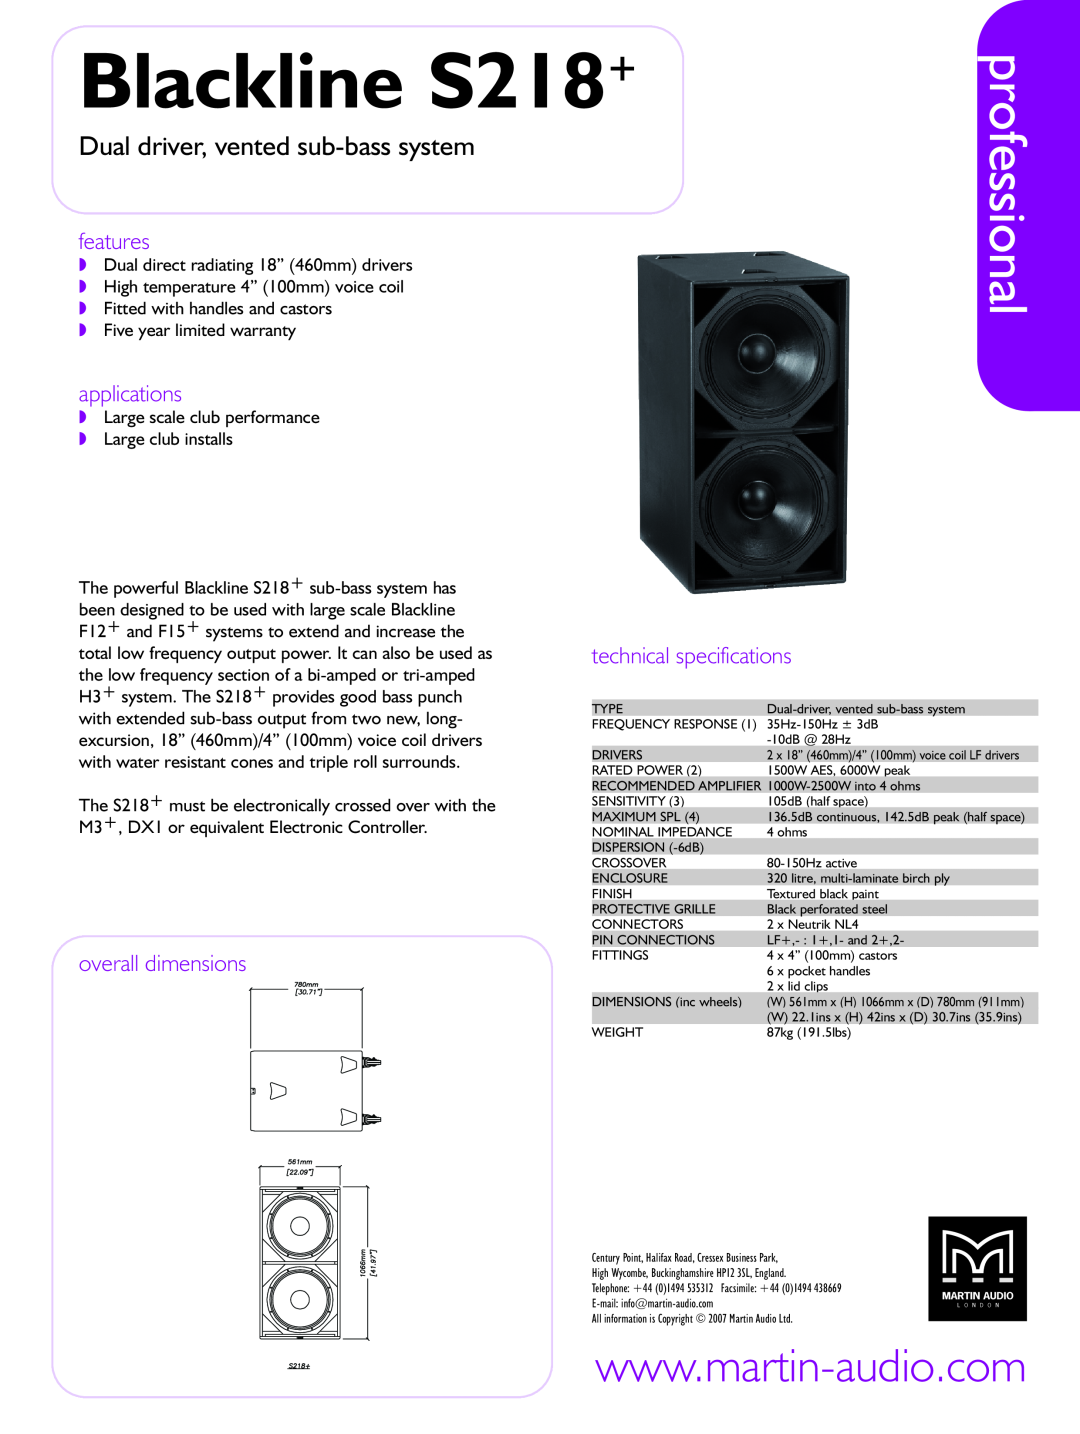 Martin Audio Blackline S218+ technical specifications professional, Dual driver, vented sub-bass system, features 